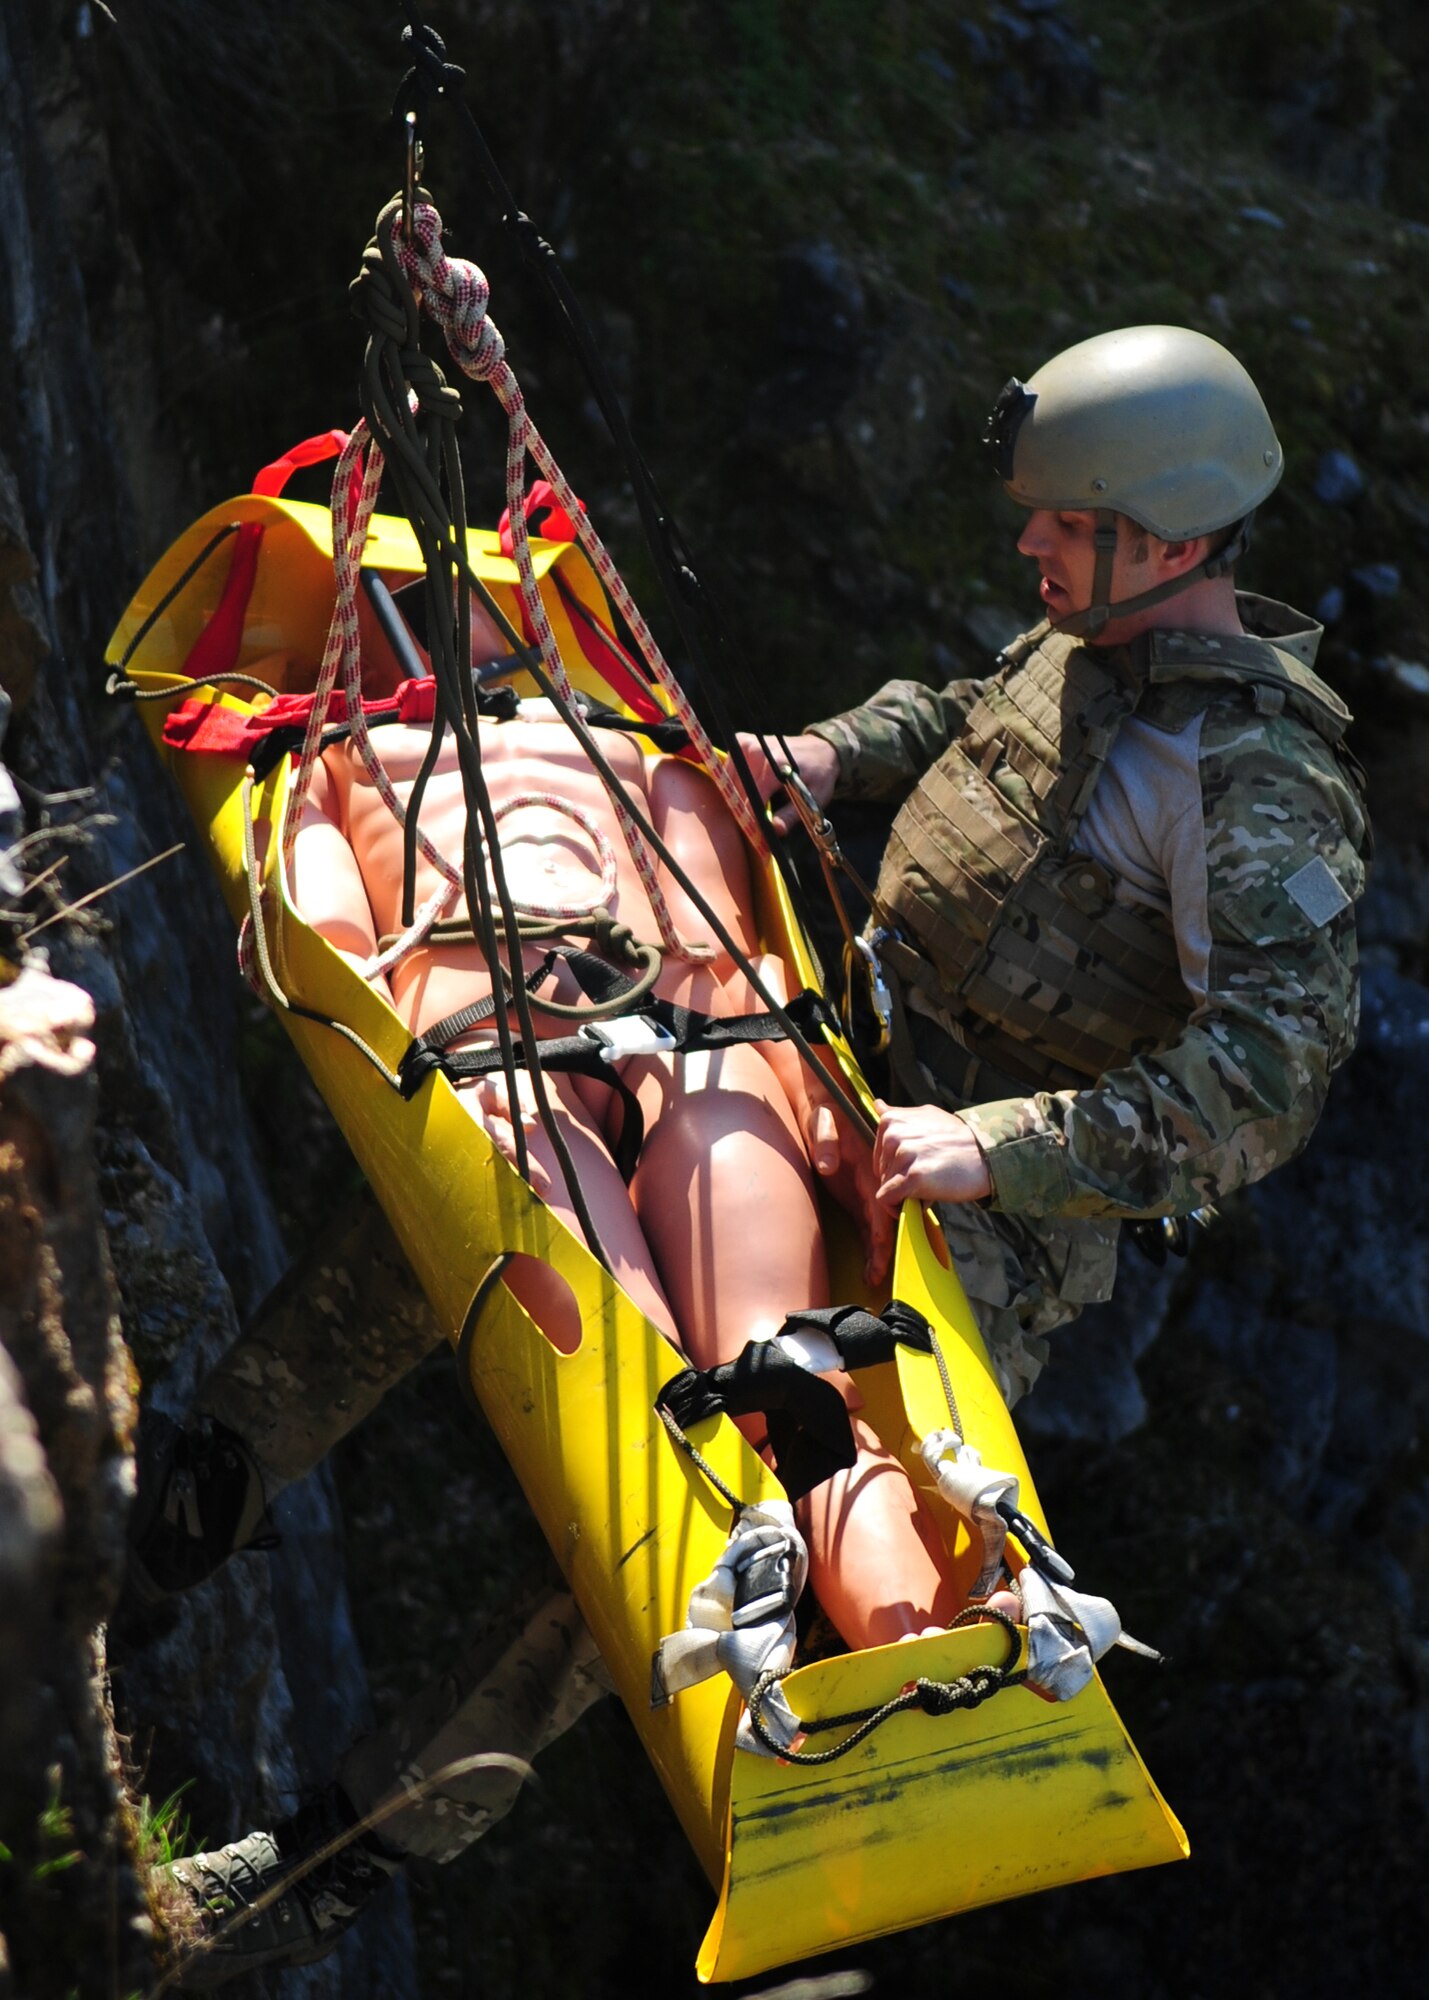 Staff Sgt. Scott Love, 9th Civil Engineer Squadron explosive ordnance disposal technician, starts his way down a 200 foot cliff during mountain warfare training in Auburn, Calif., Feb. 17, 2012. The EOD flight here stays proficient in mountain warfare training to handle various situations such as this. (U.S. Air Force photo by Senior Airman Shawn Nickel/Released)